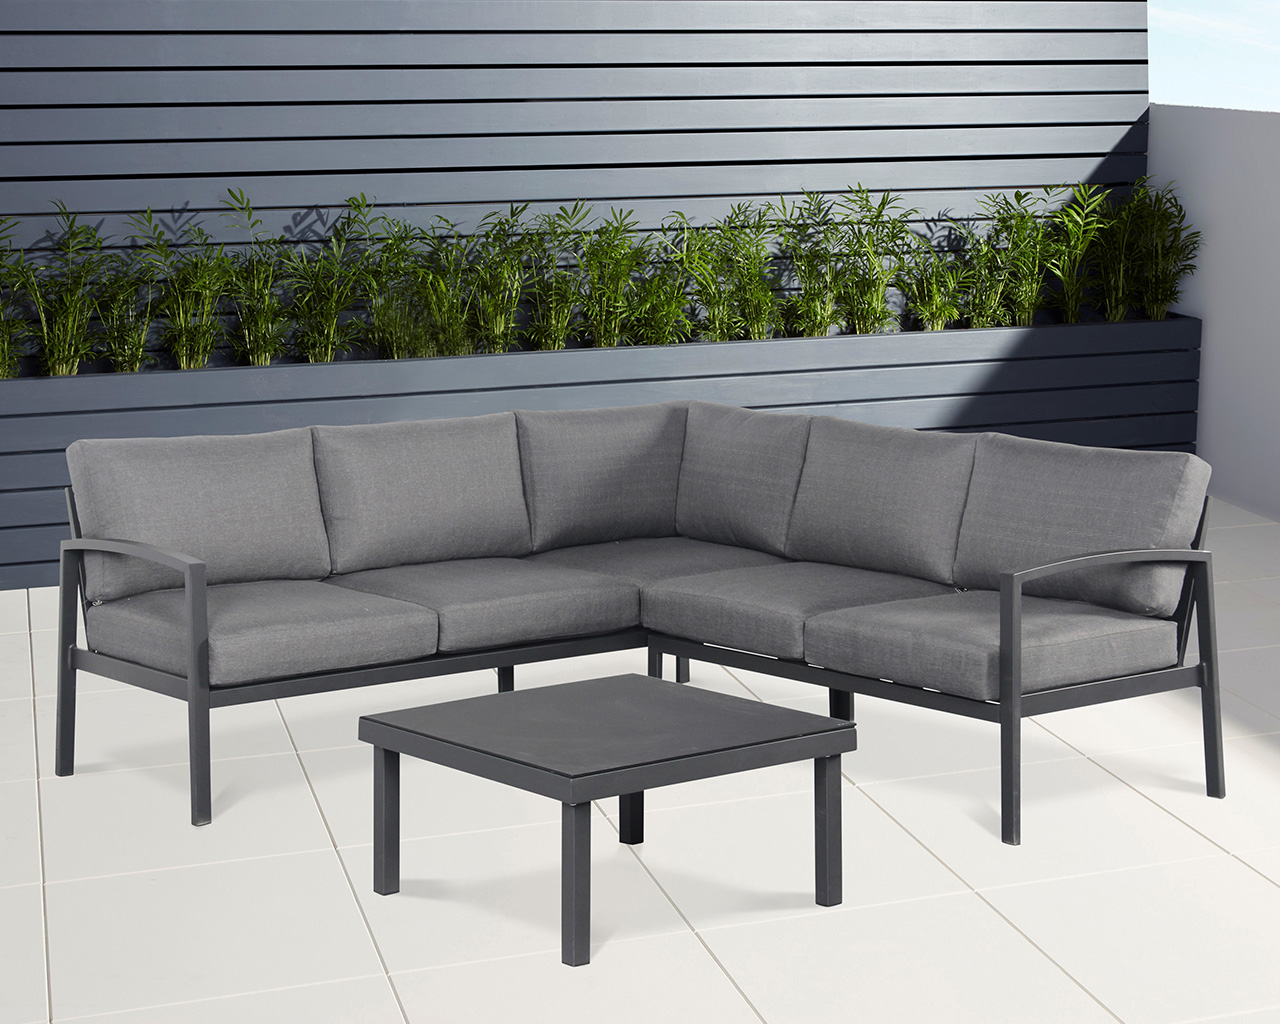 Buy Malden 3 Piece Lounge Setting at Barbeques Galore.